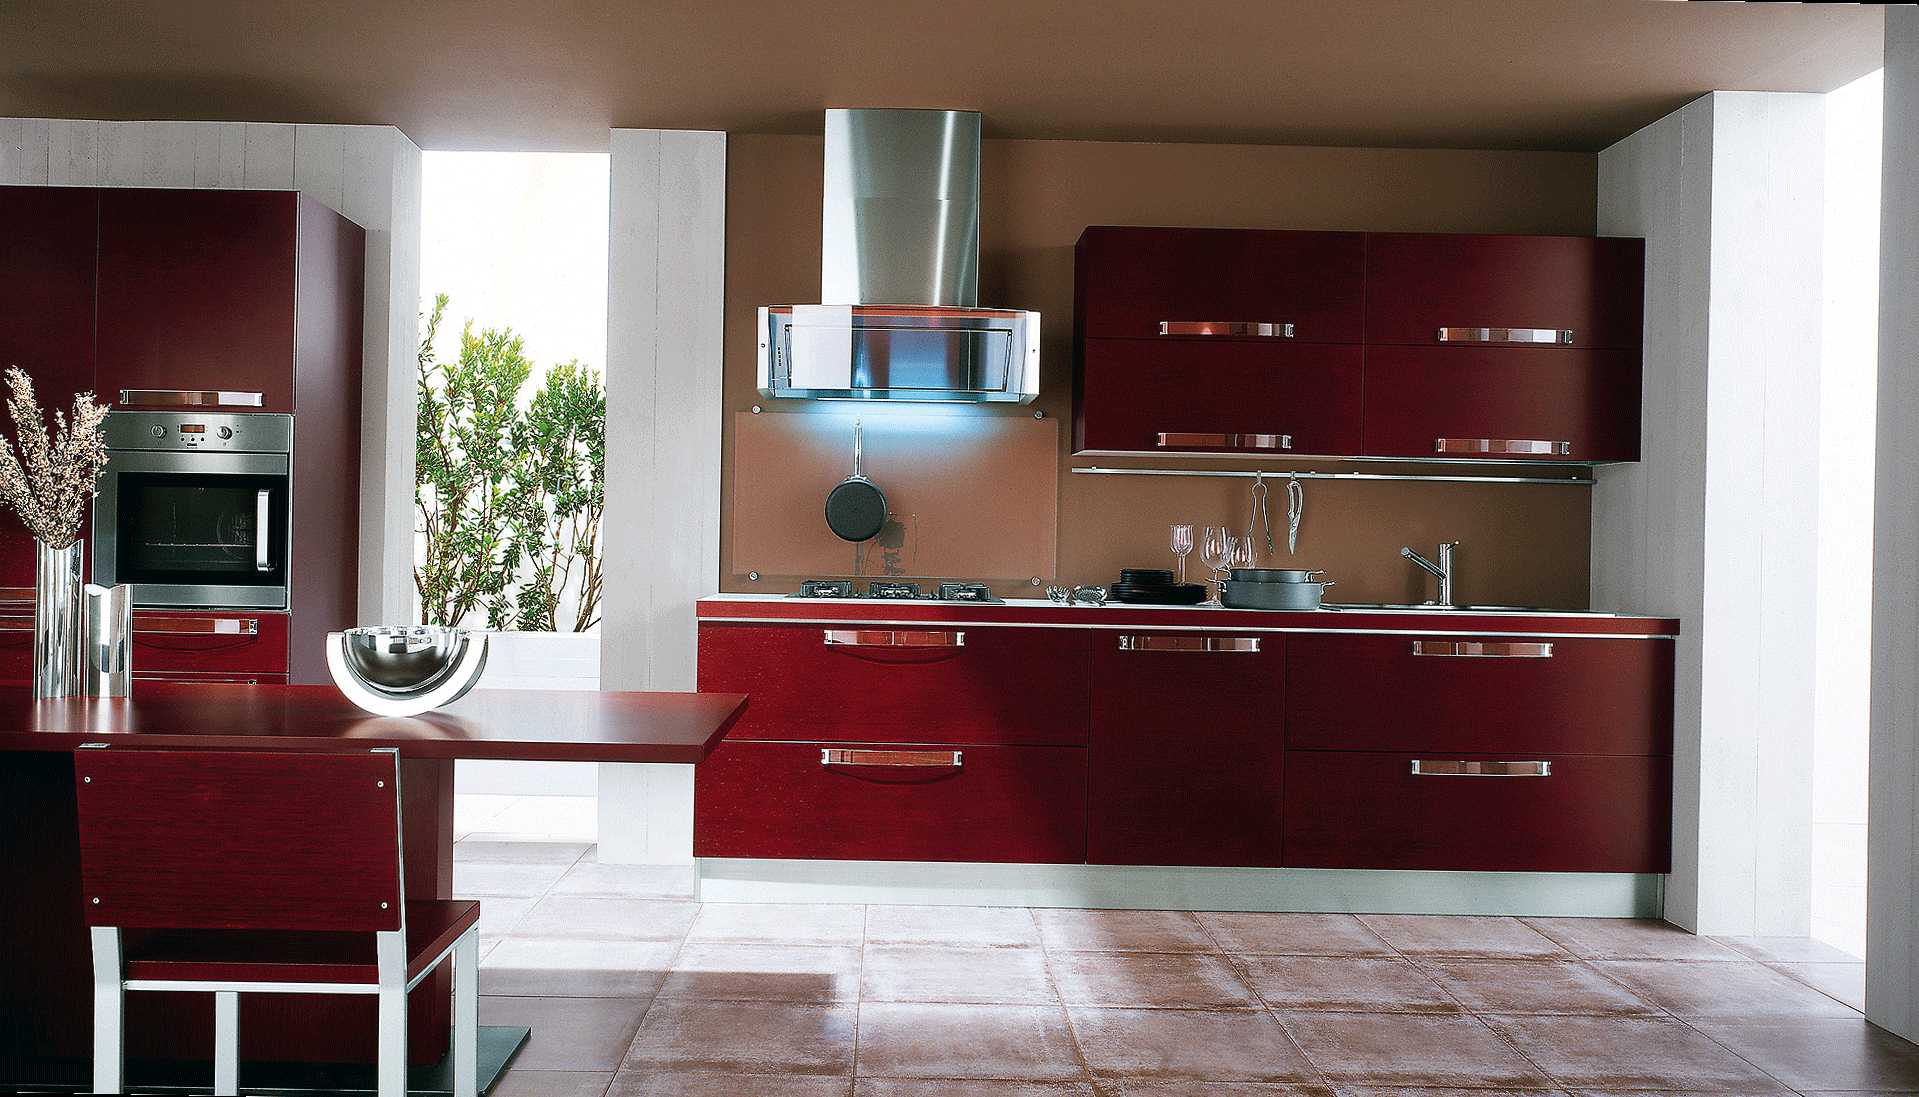 a combination of bright colors in the style of the kitchen